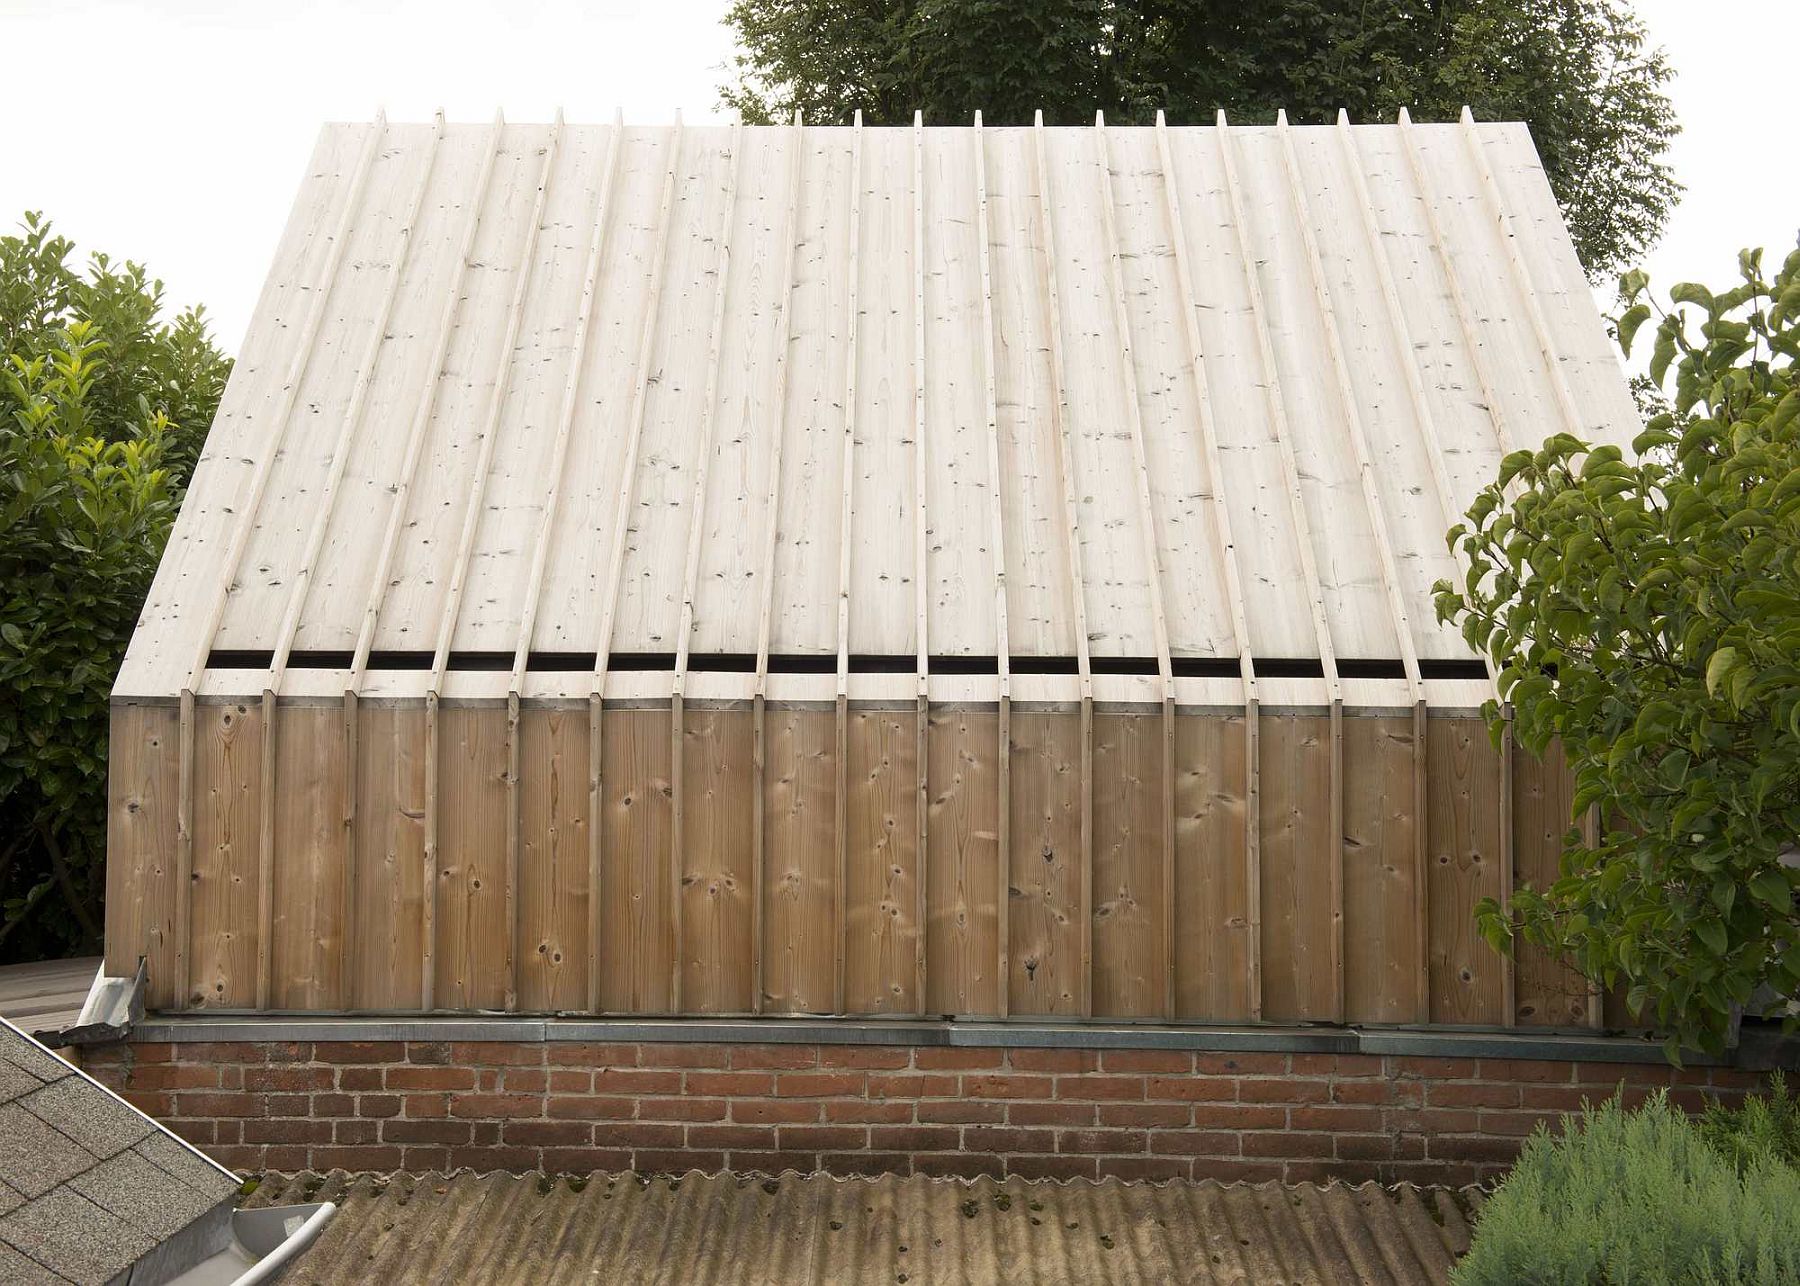 Wooden volume turns the old brick-walled shed in the backyard into a painting studio